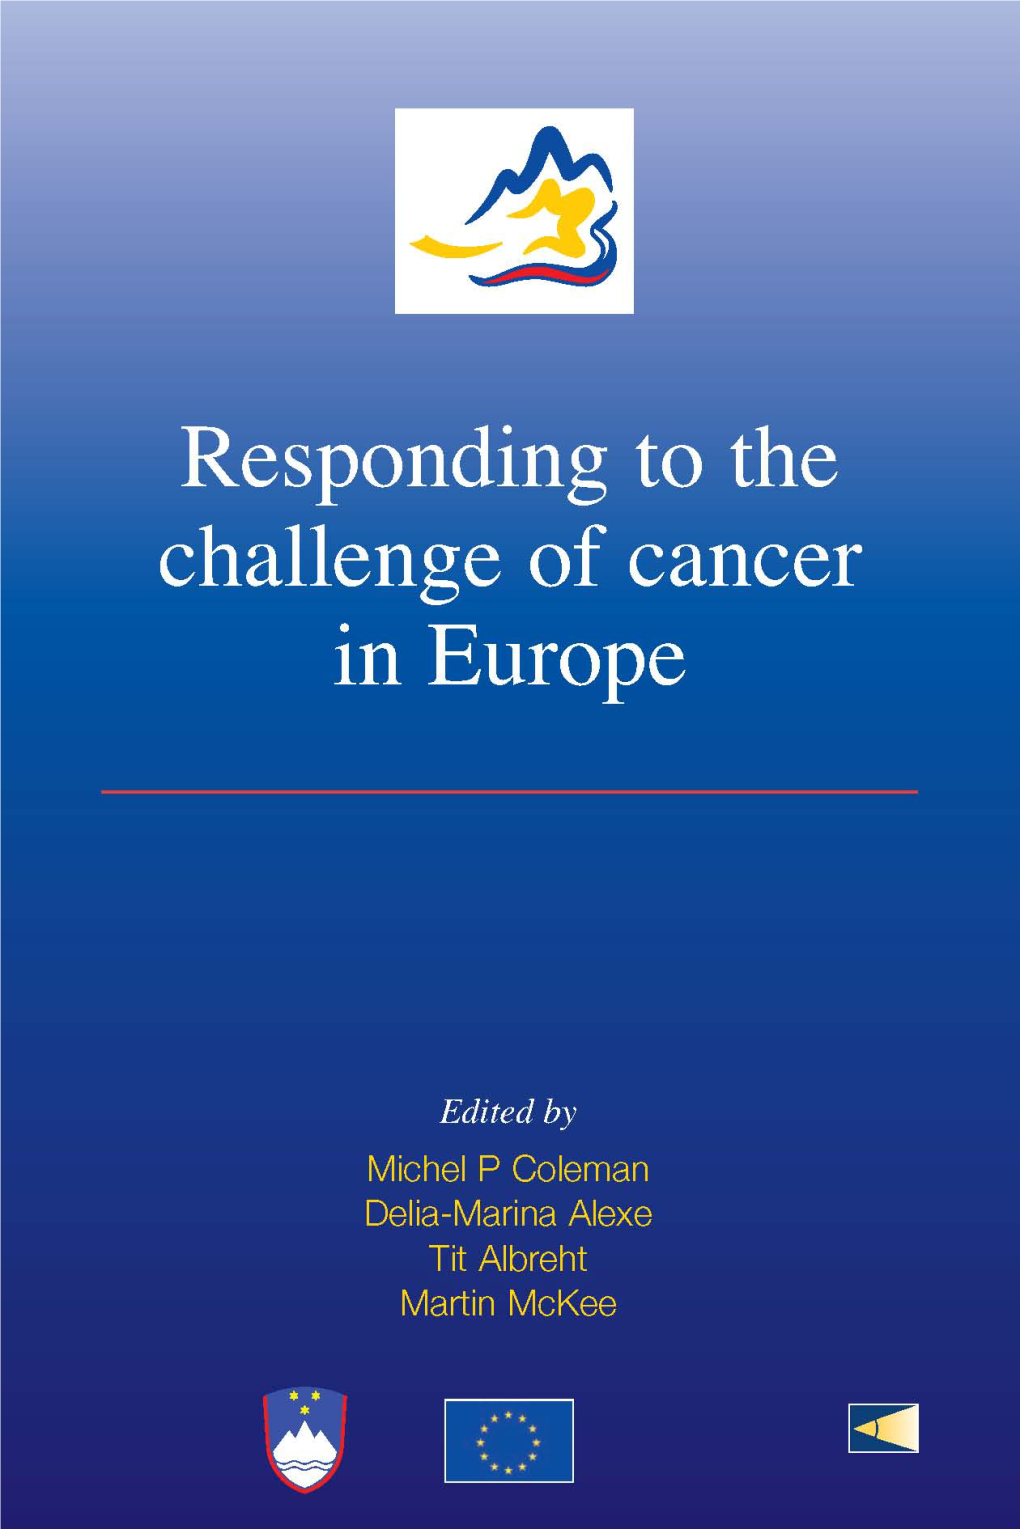 Responding to the Challenge of Cancer in Europe © Institute of Public Health of the Republic of Slovenia, 2008